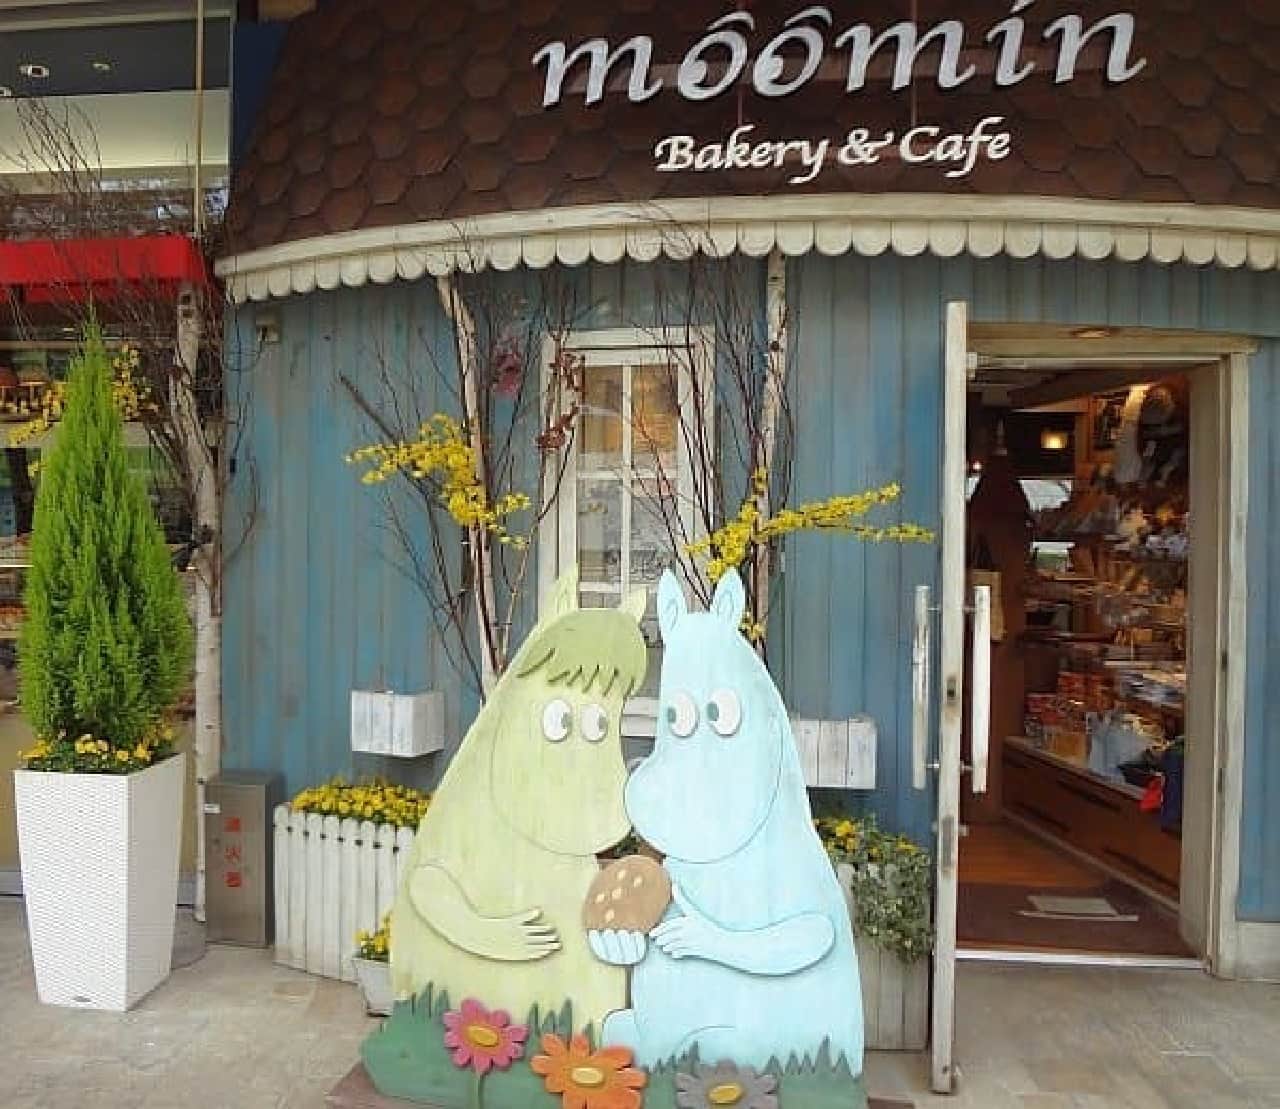 In front of the bakery, you can meet Moomin and Floren who have bread with each other!